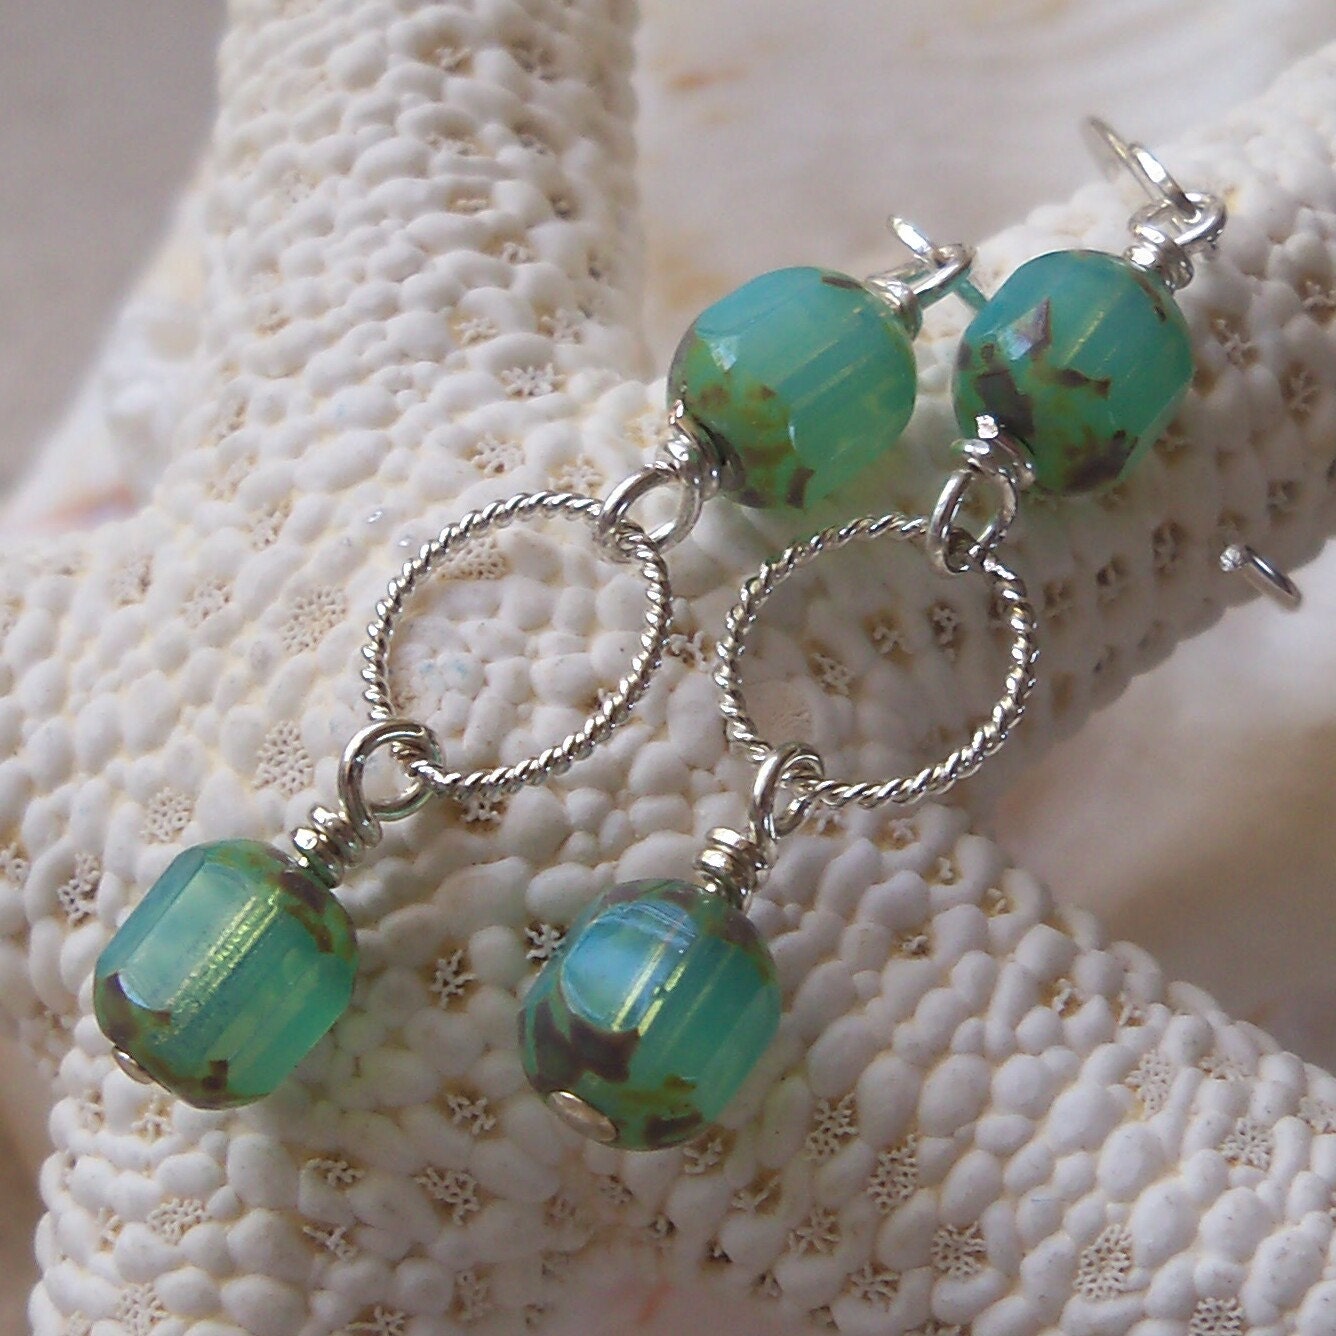 Seafoam Cathedral Beads and Sterling Silver Earrings - mompotter